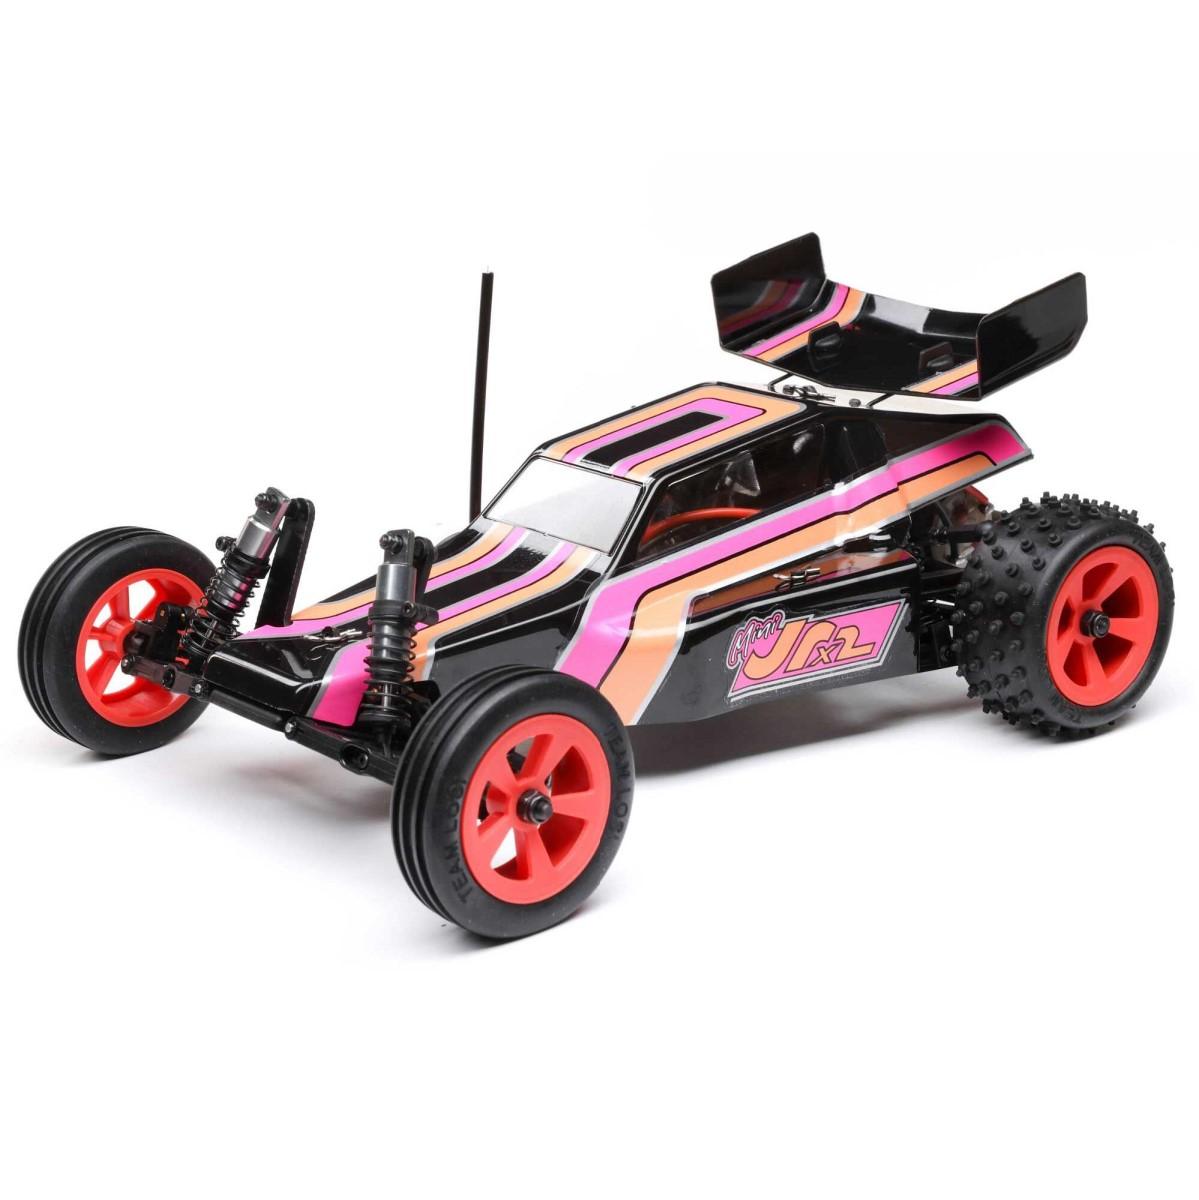 Losi Jrx2 Mini: Compact and reliable design for top-notch racing experience.